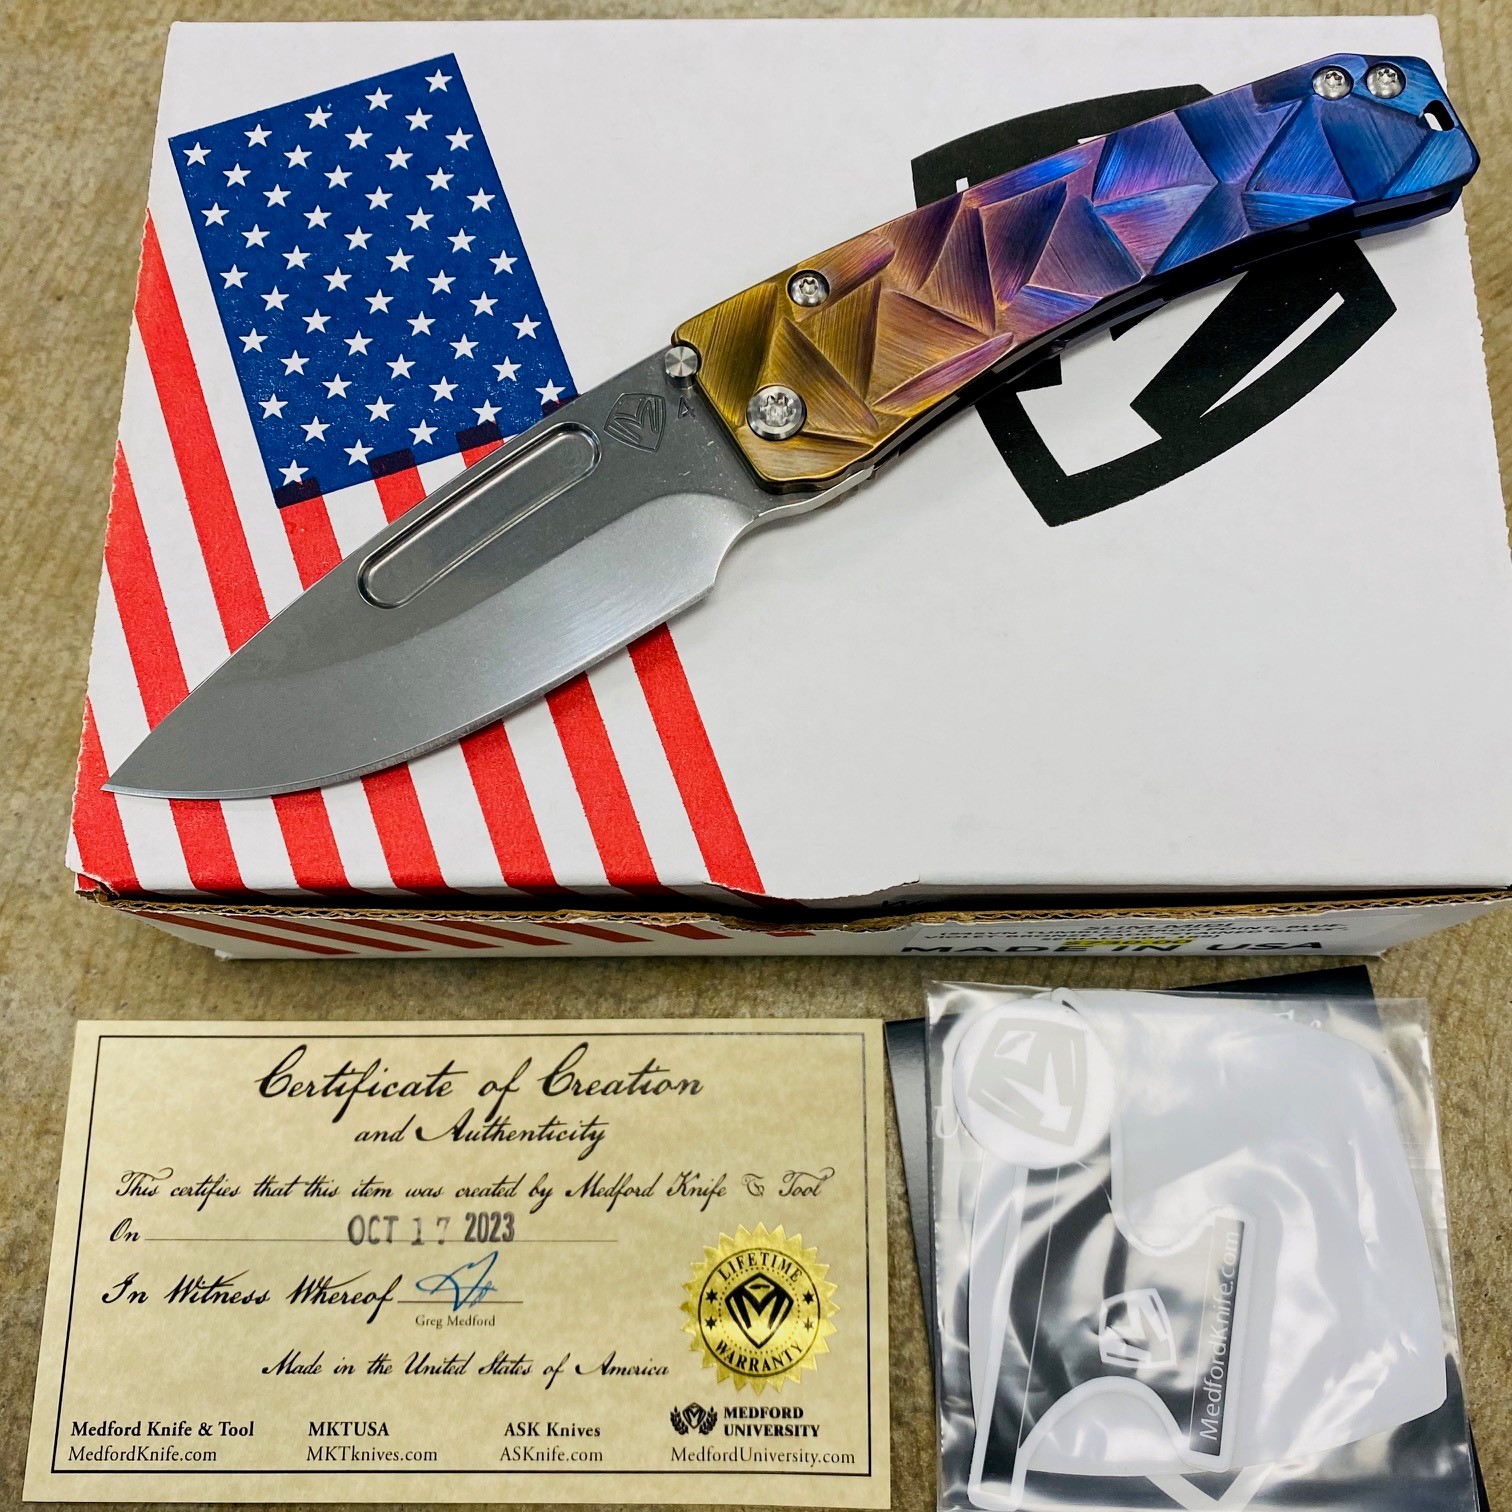 Medford Slim Midi S45VN Tumbled 3.25" Drop Point Blue Violet Bronze Stained Glass Knife Serial 306-189